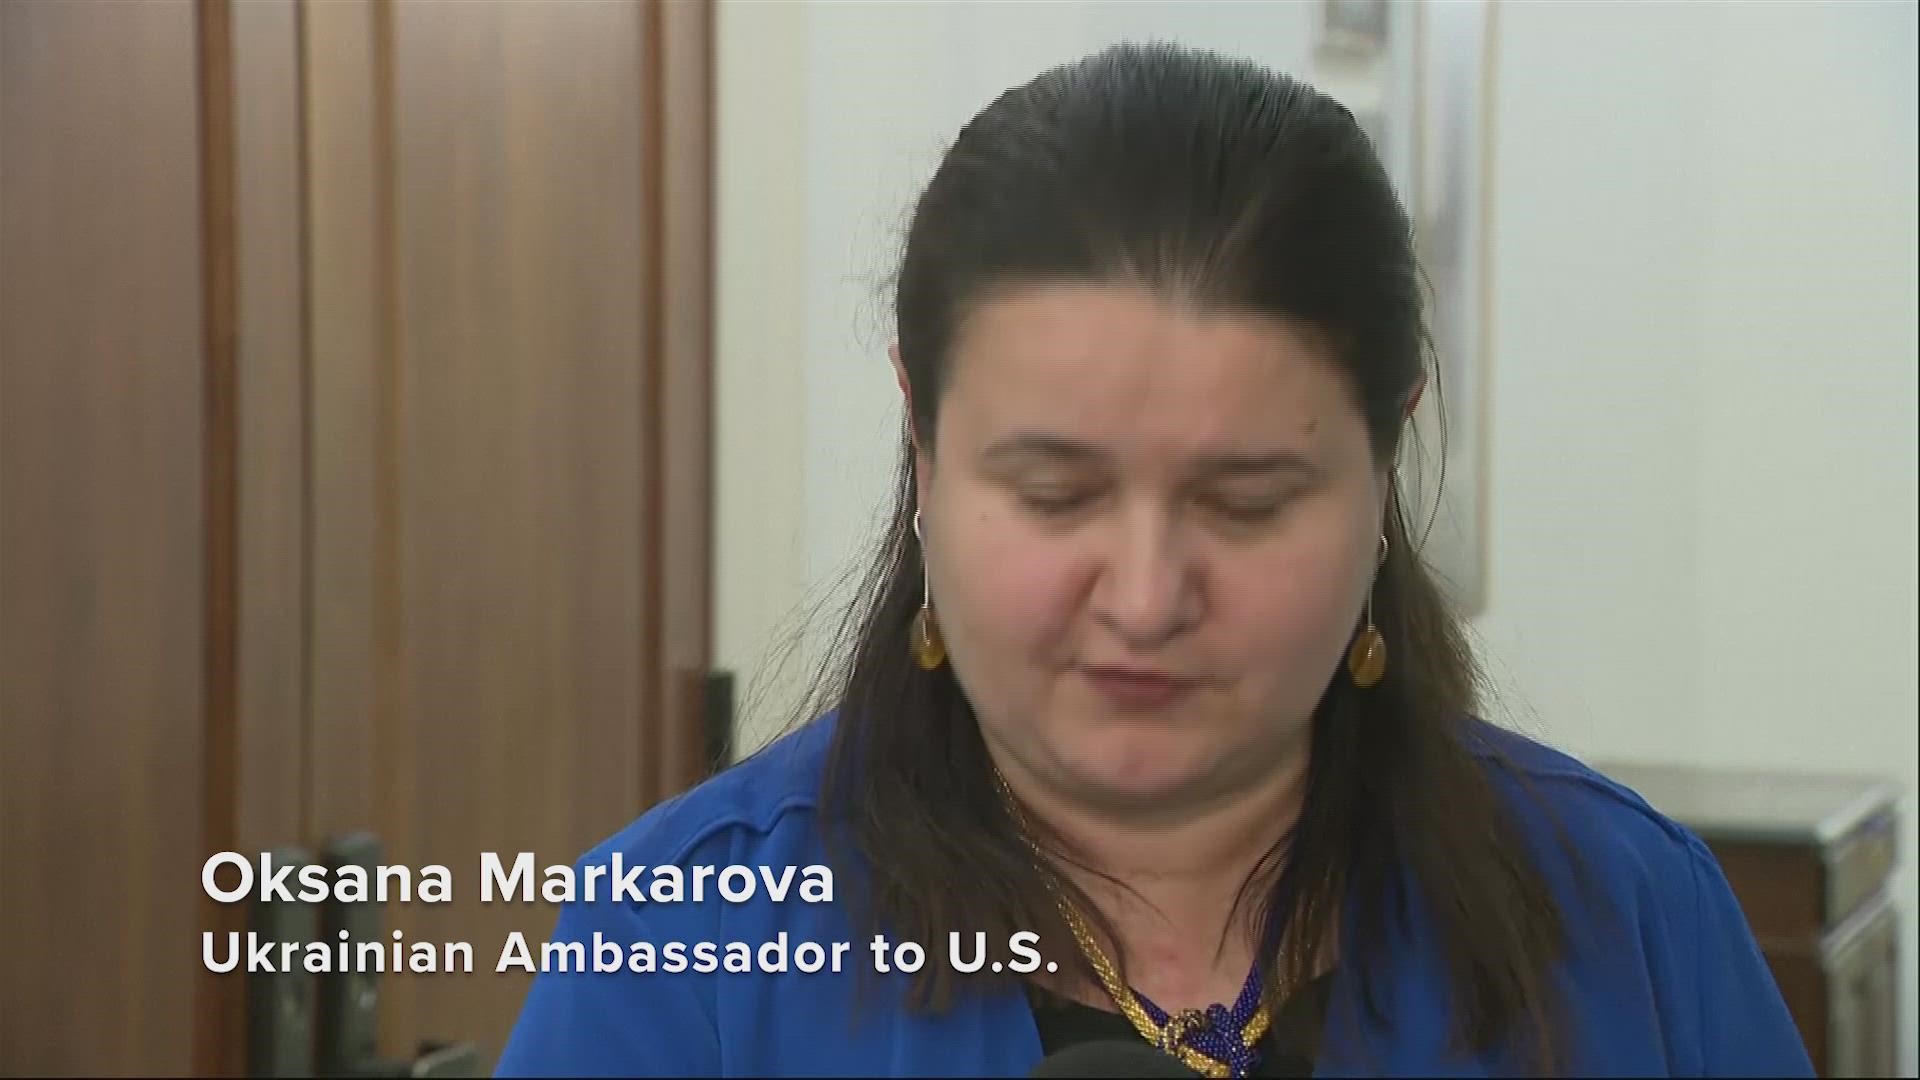 Ukraine's ambassador to the U.S. accused Russia of using a vacuum bomb, an incendiary weapon that she says violates the Geneva Convention.